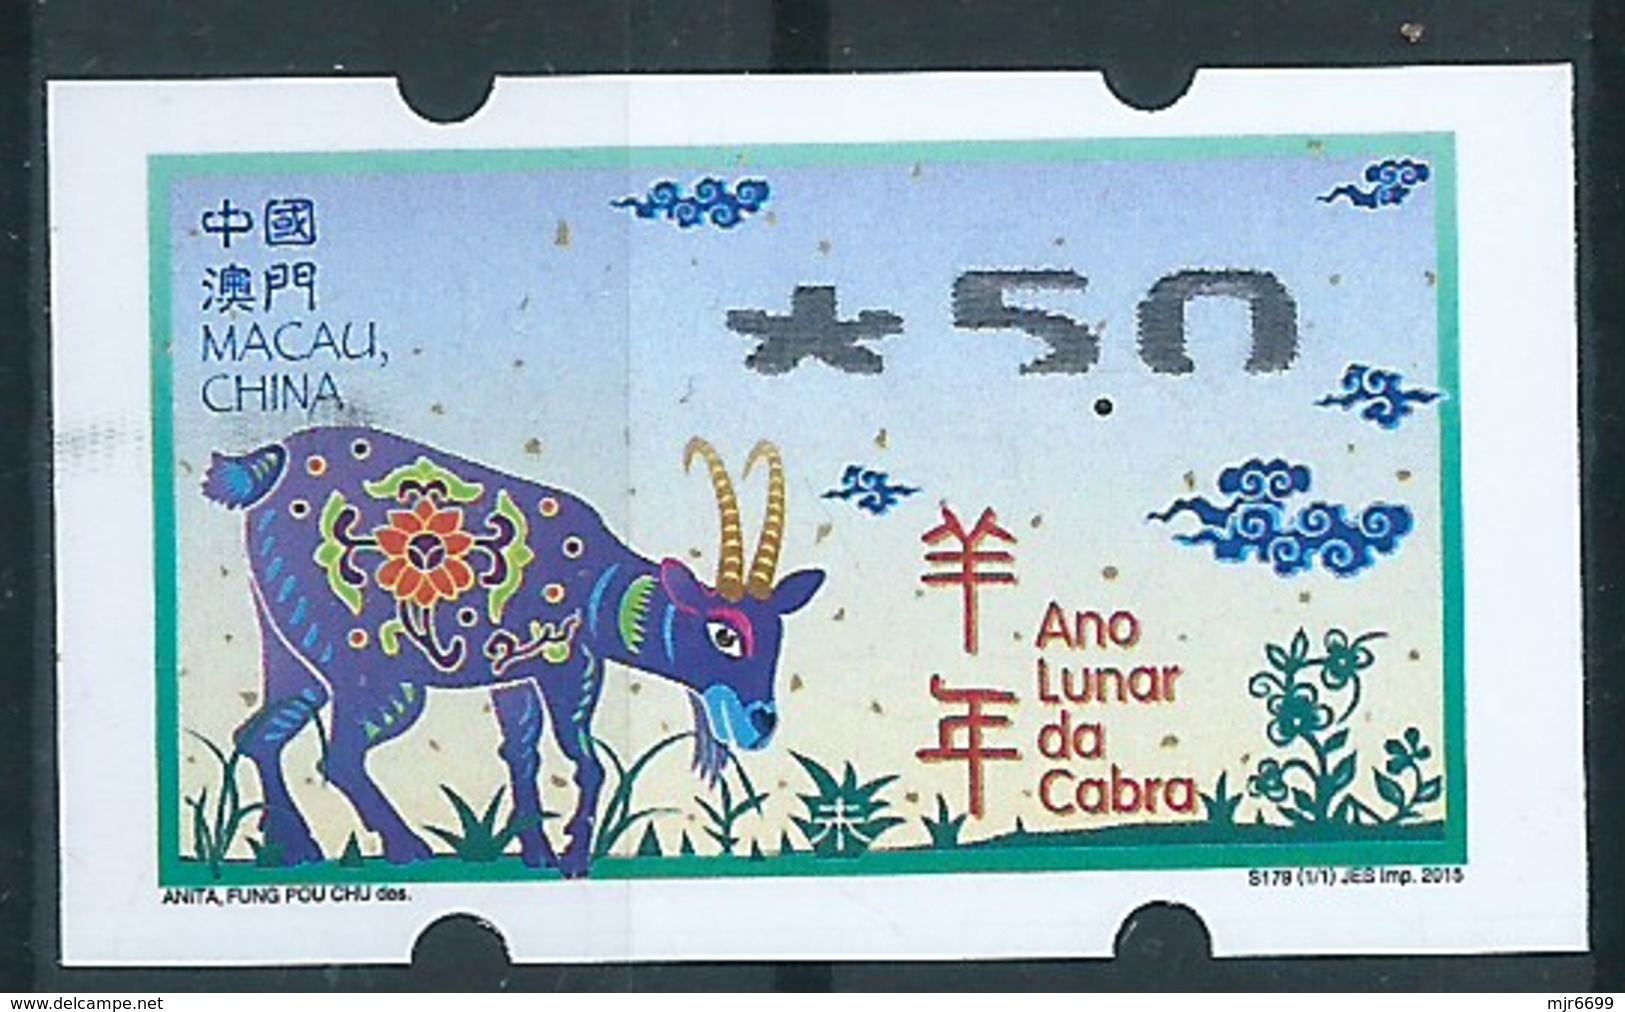 MACAU 2015 LUNAR NEW YEAR OF THE GOAT ATM LABELS ERROR PRINT - BOTTOM PARTLY NO INK PRINT - Automatenmarken